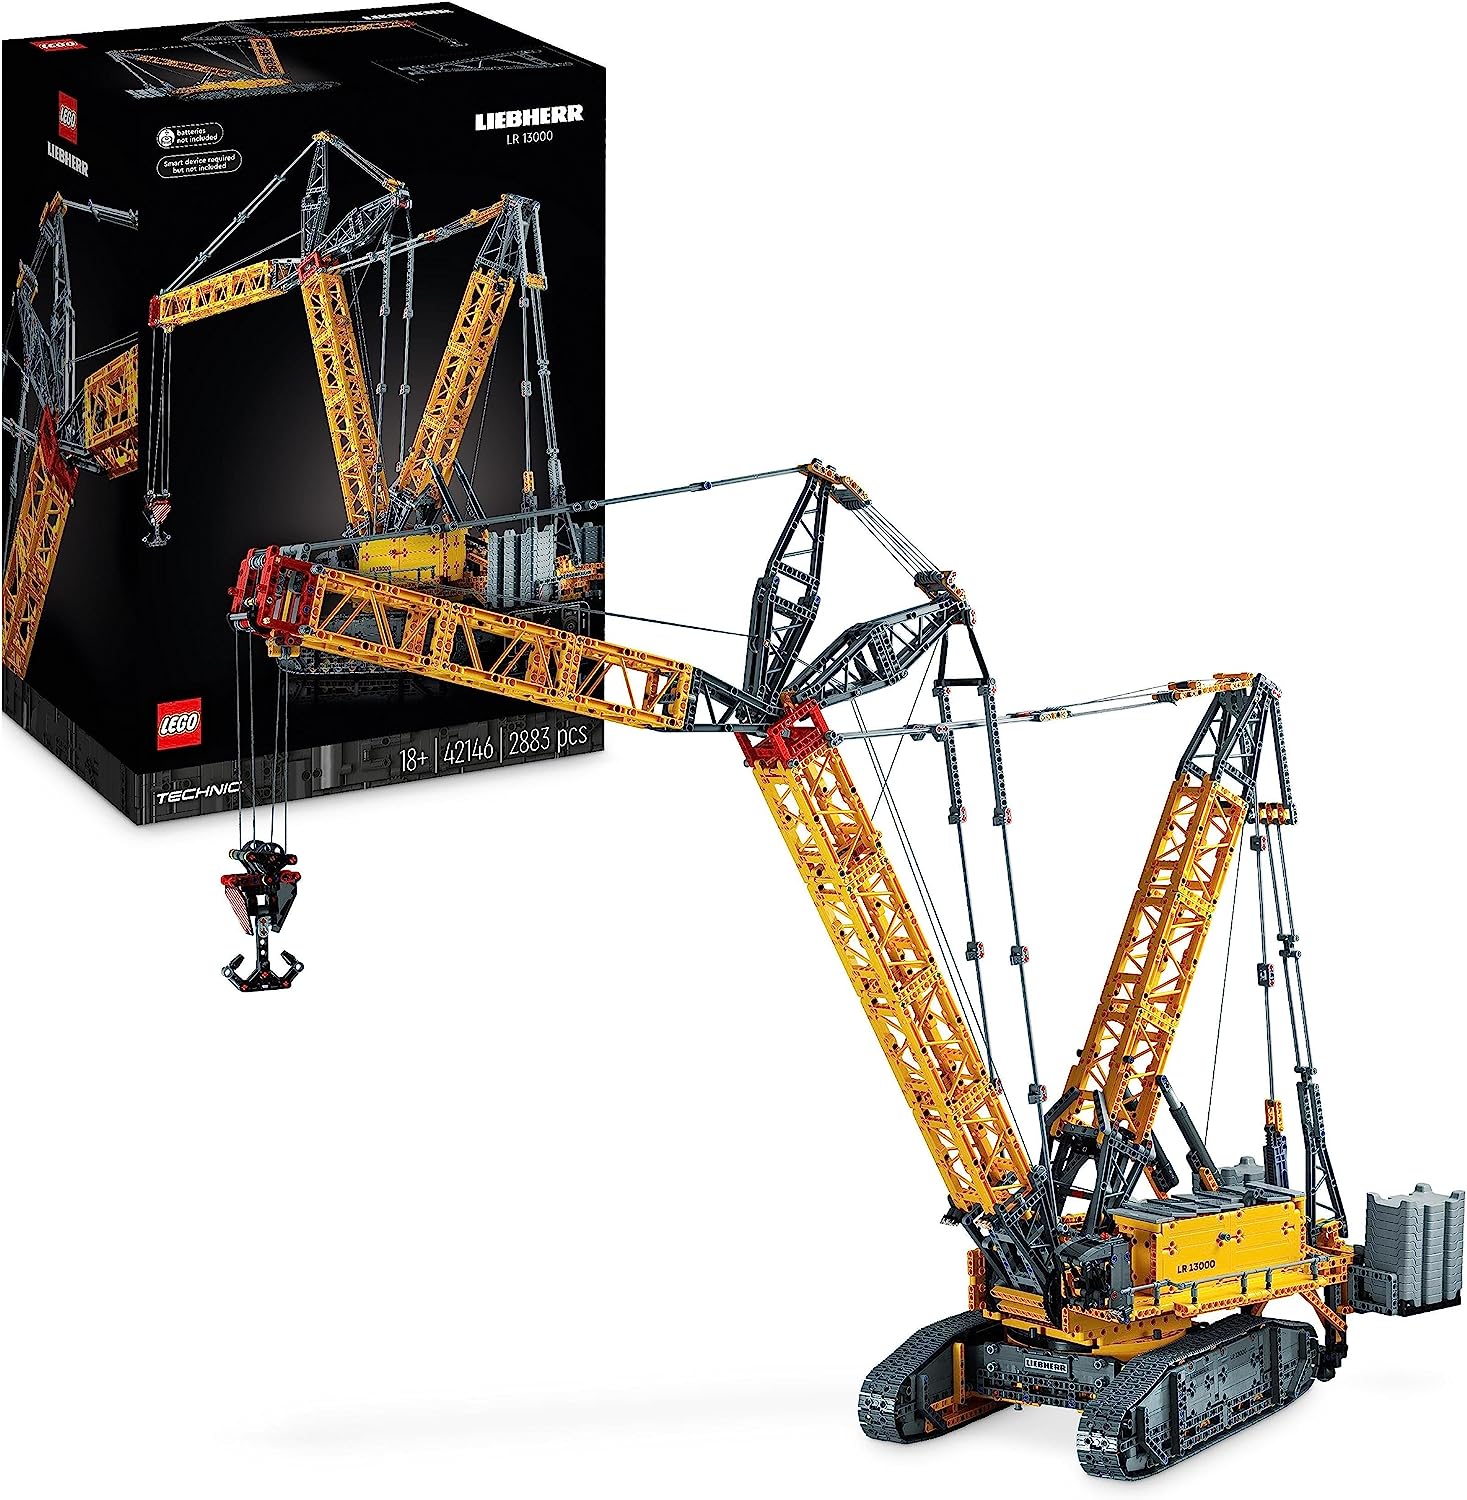 LEGO 42146 Technic Liebherr LR 13000 Crawler Crane Set, Build the Ultimate Remote Controlled Construction Vehicle Model with Control+ App, with Winch System and Rocker Boom, Large Model Kit for Adults